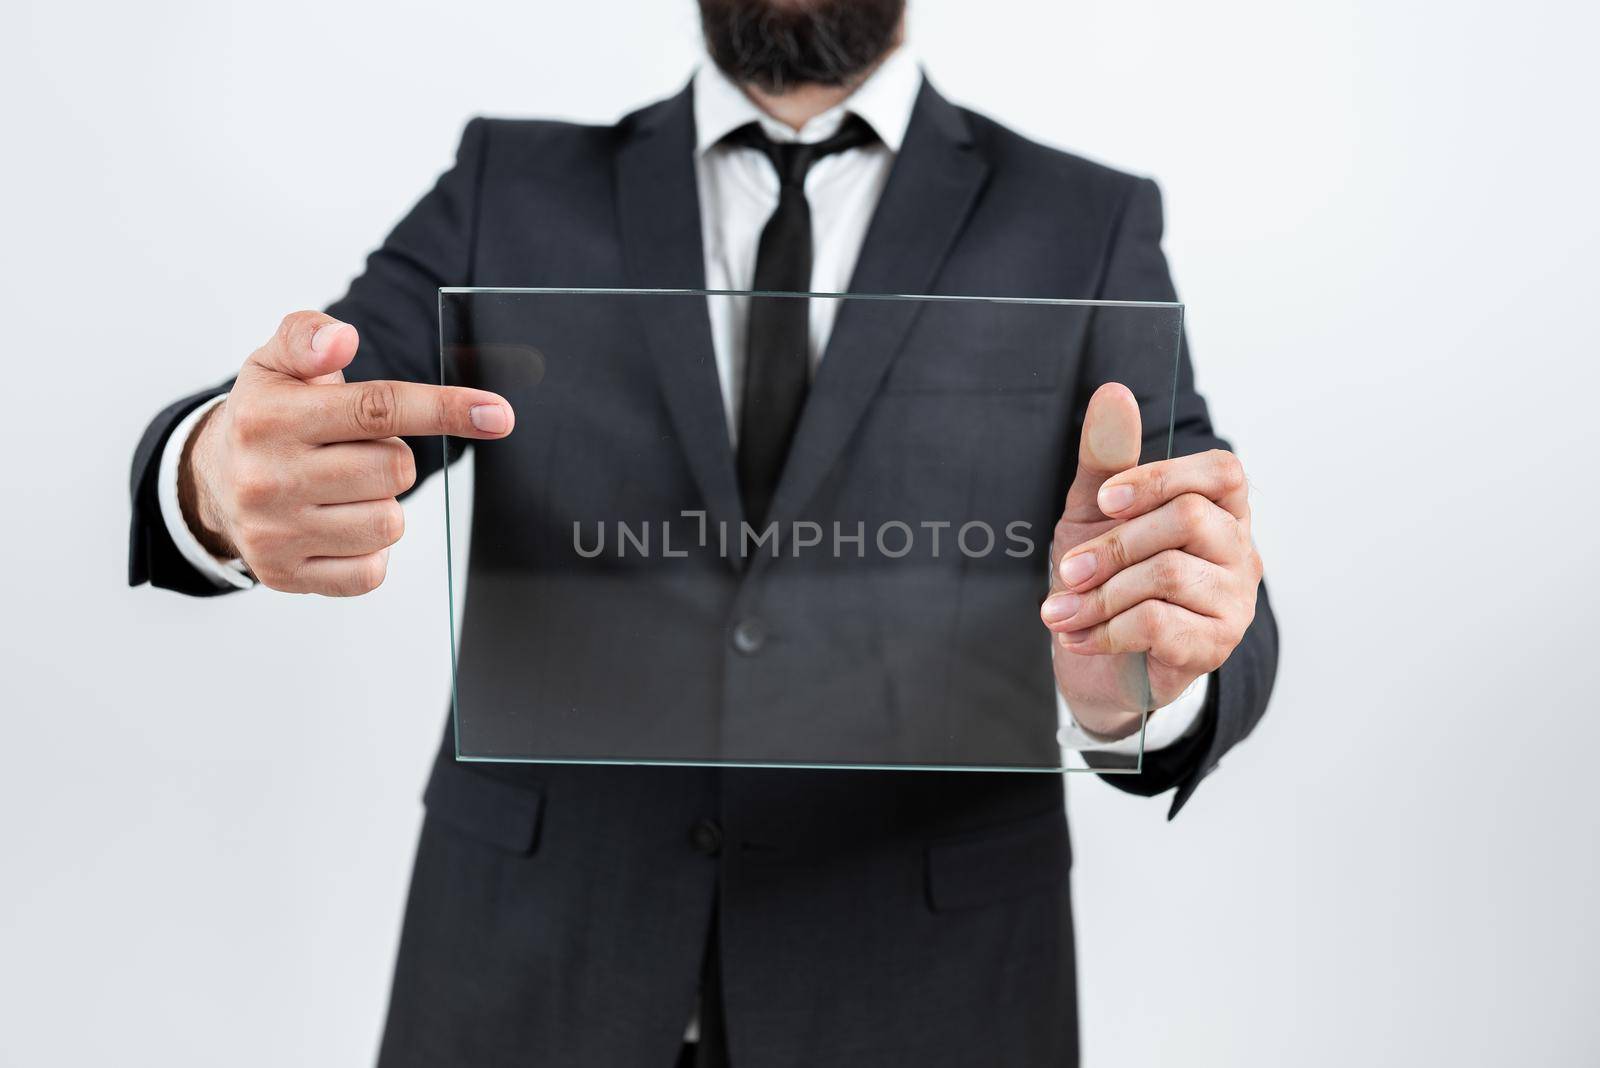 Businessman Holding Transparent Glass And Promoting The Company Brand.